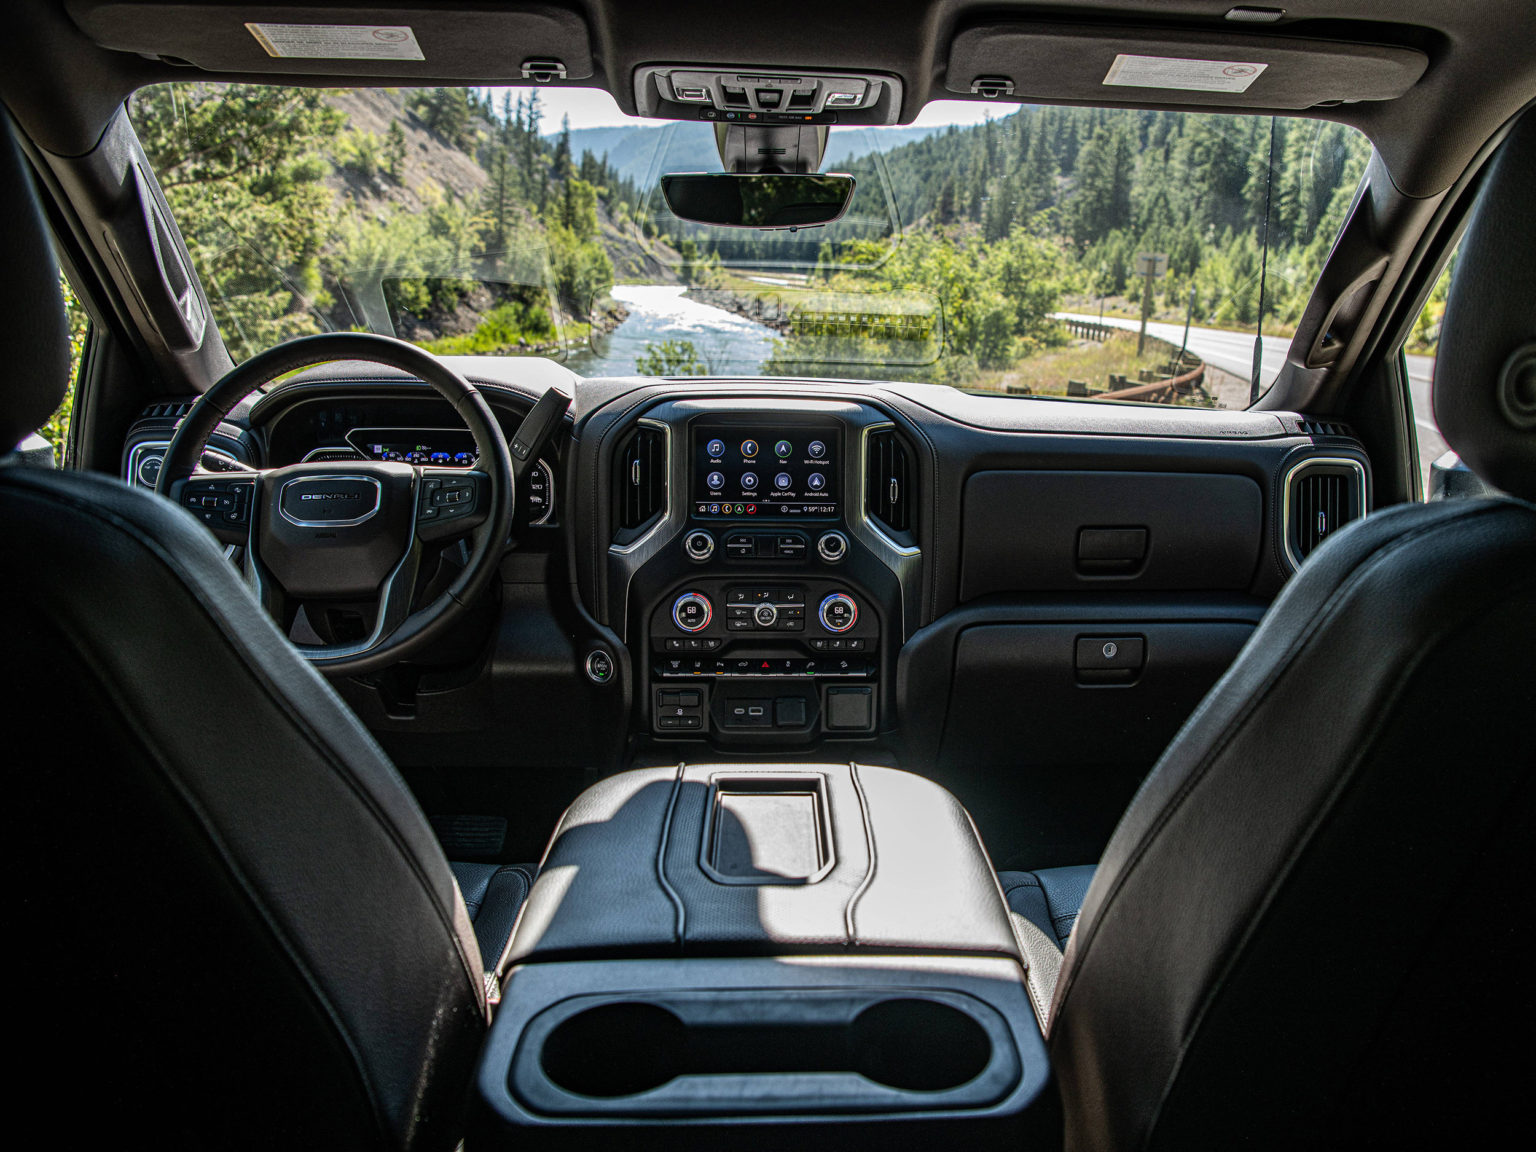 The GMC Sierra HD is one of the many trucks on this list with a high-class interior.